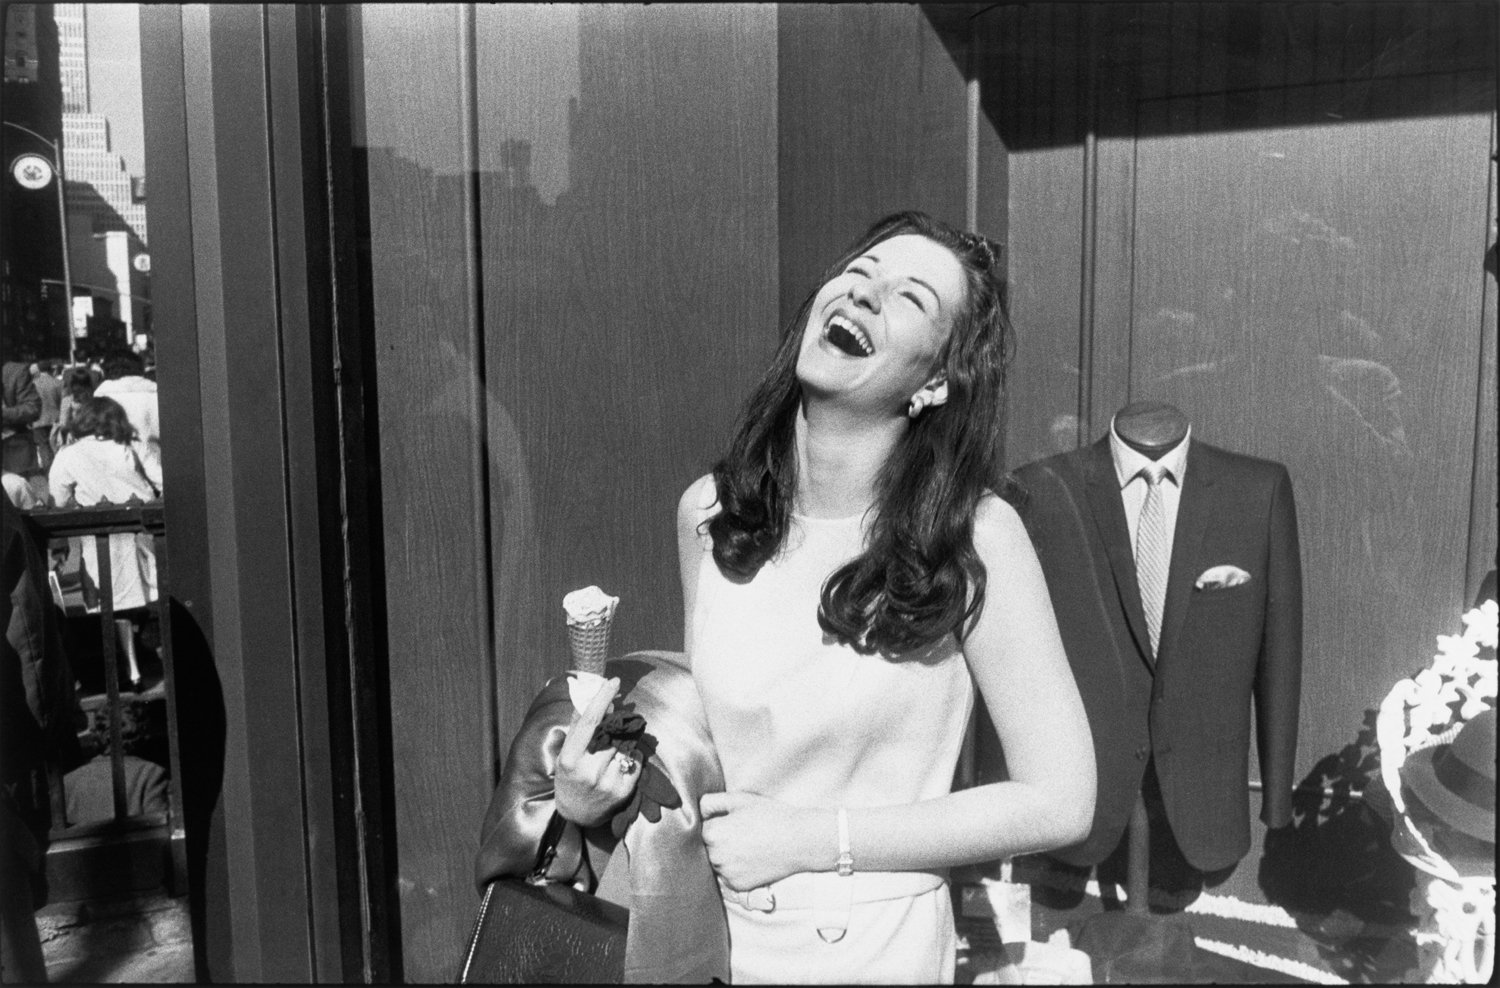  Garry Winogrand,  Women are Beautiful portfolio , 1968, printed 1981. Courtesy of the Pilara Family Foundation Collection and Sotheby’s.&nbsp; 